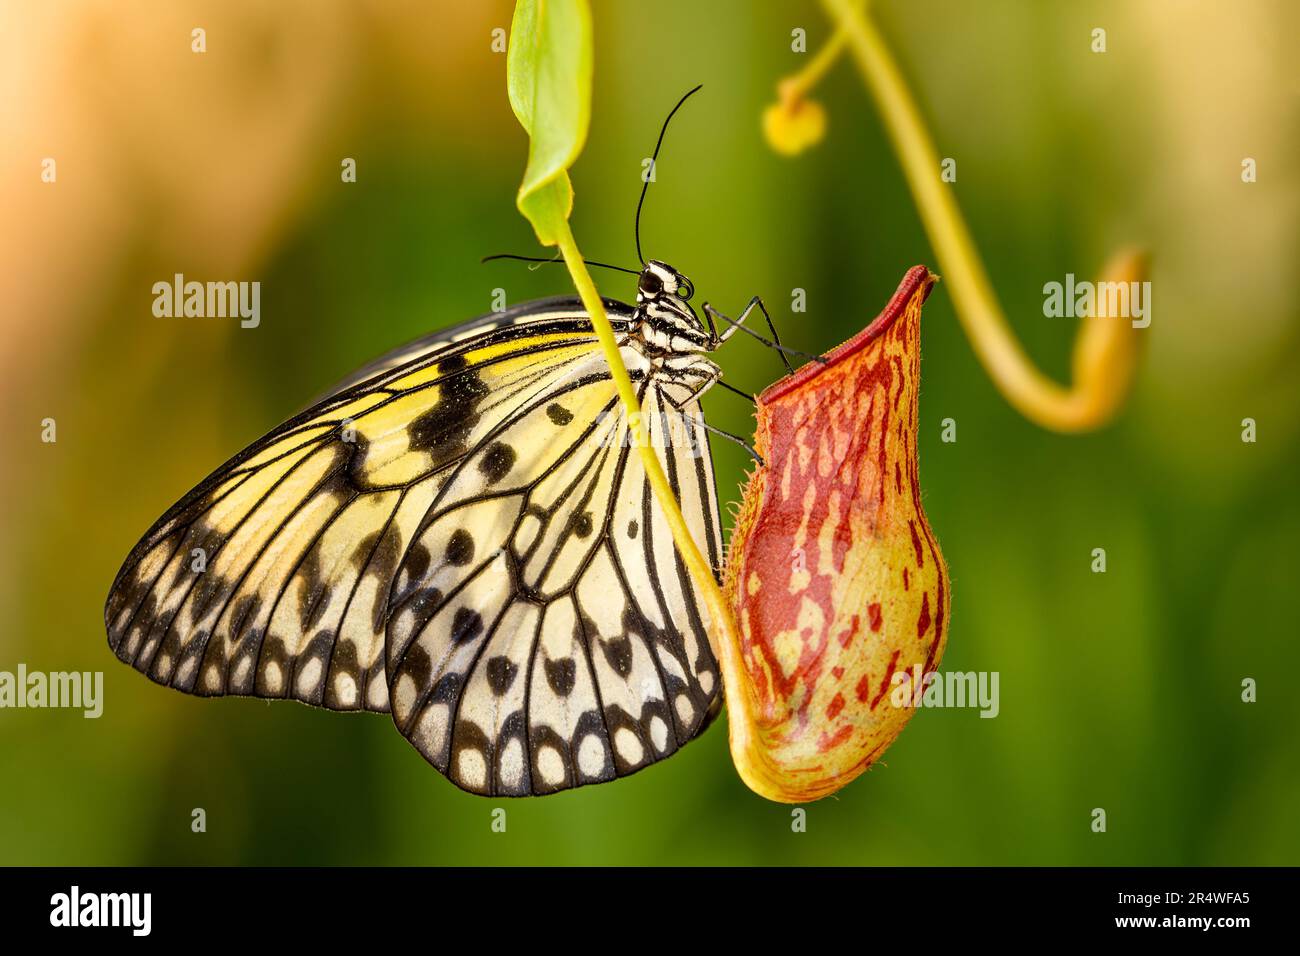 Mangrove Tree Nymph - Idea leuconoe, beautiful black and white buttefly from Southeast Asia. Stock Photo